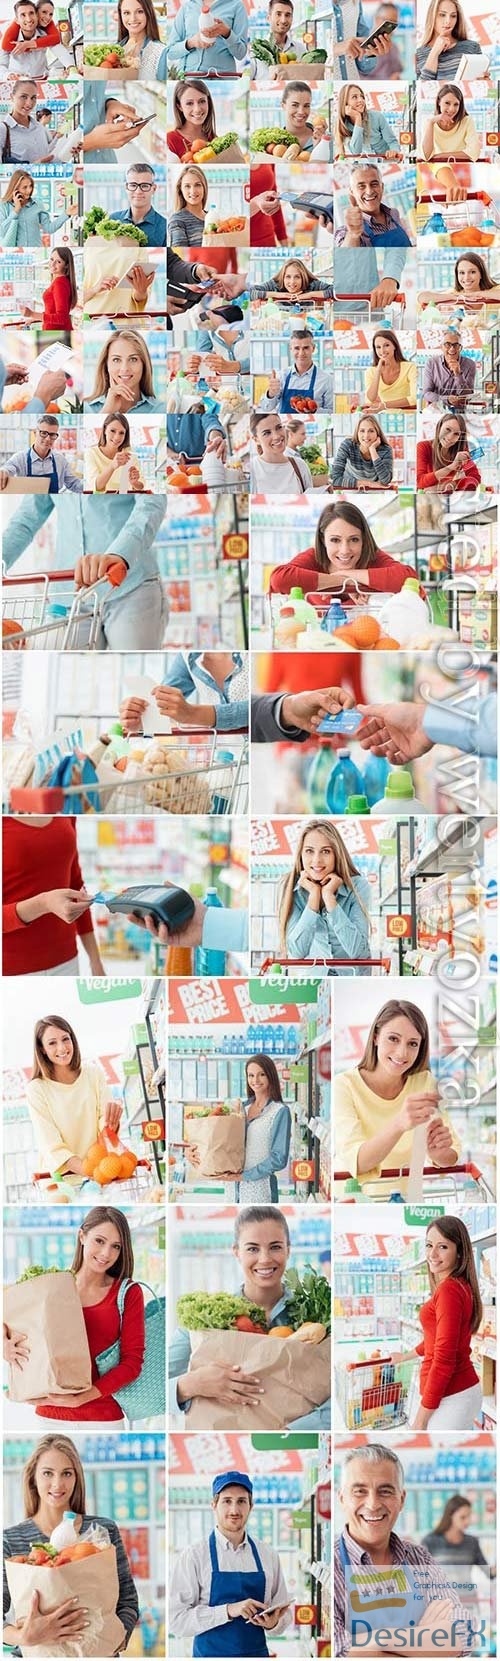 Men and women in super market shopping stock photo